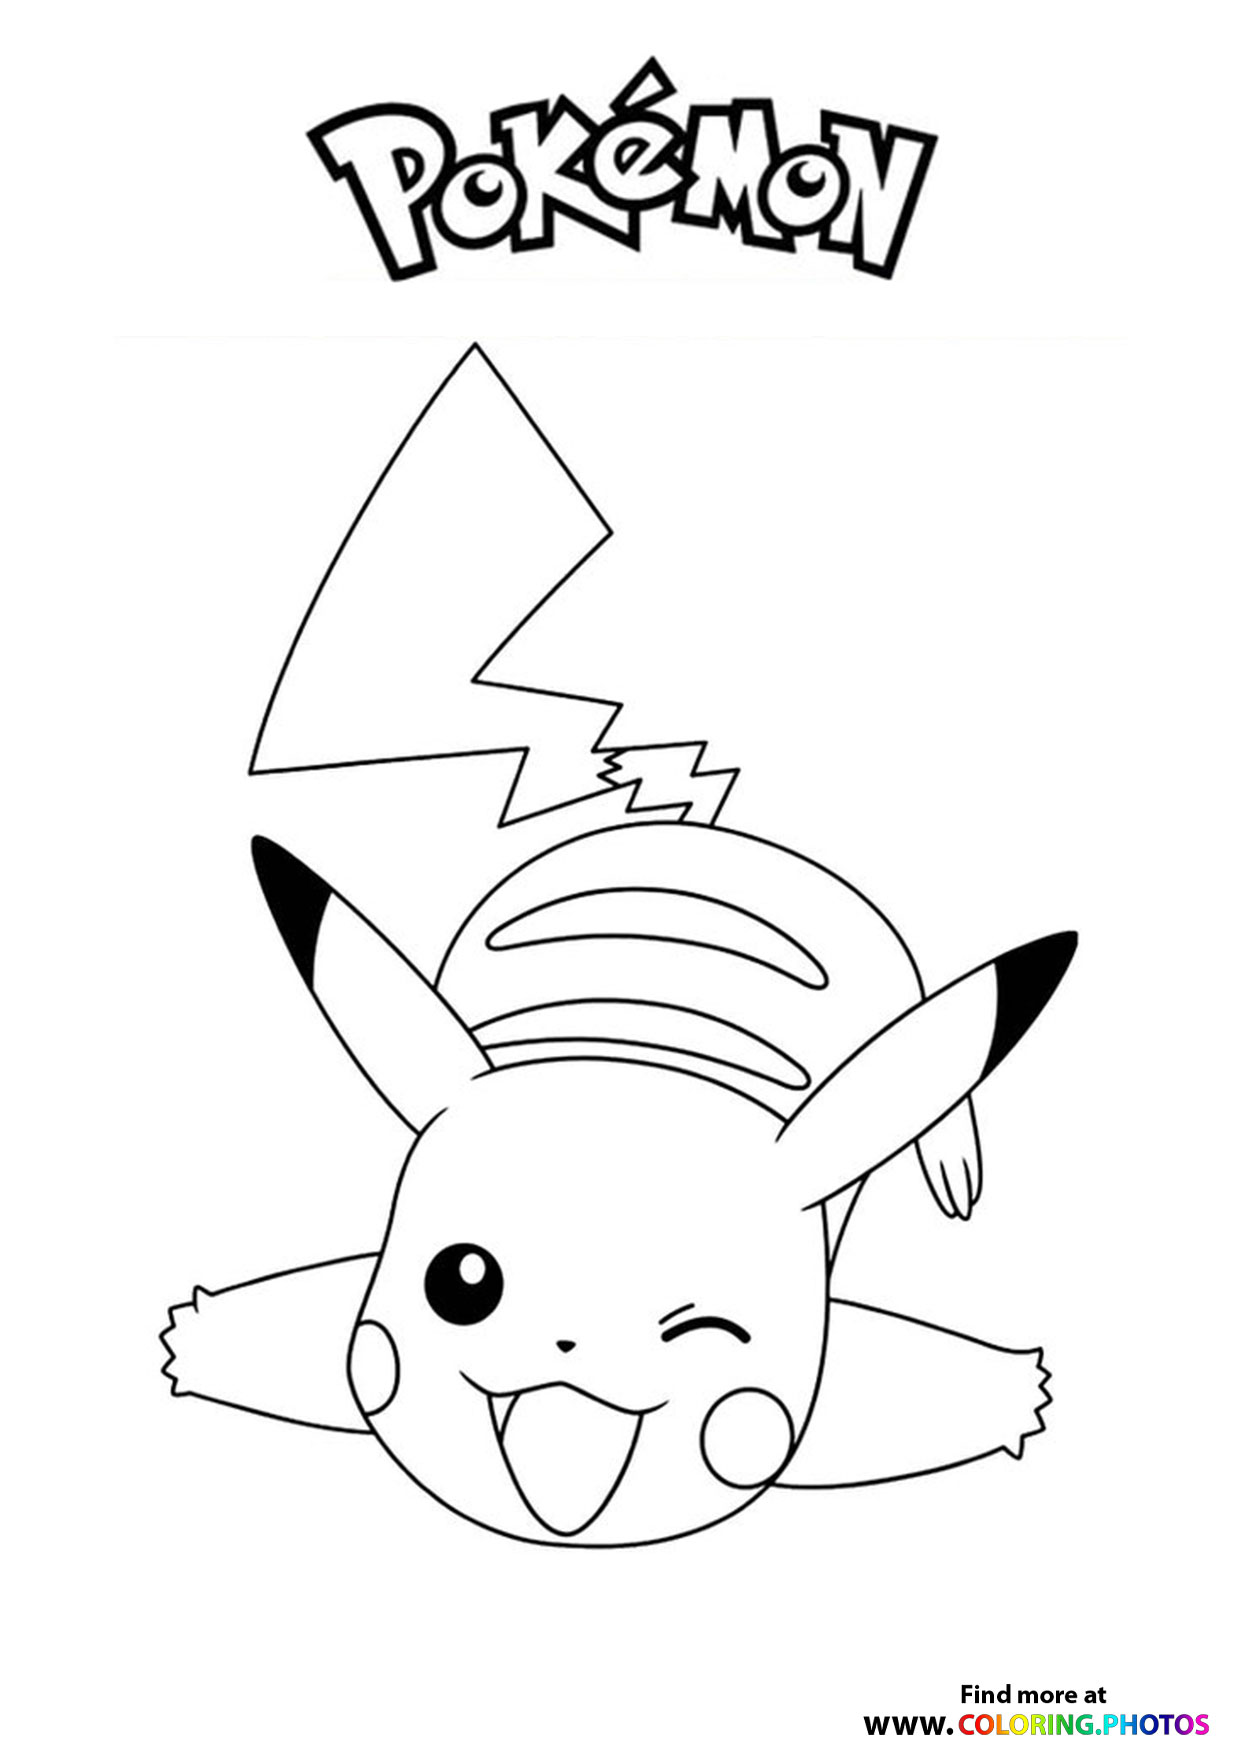 Pikachu Being Silly Pokemon Coloring Pages For Kids